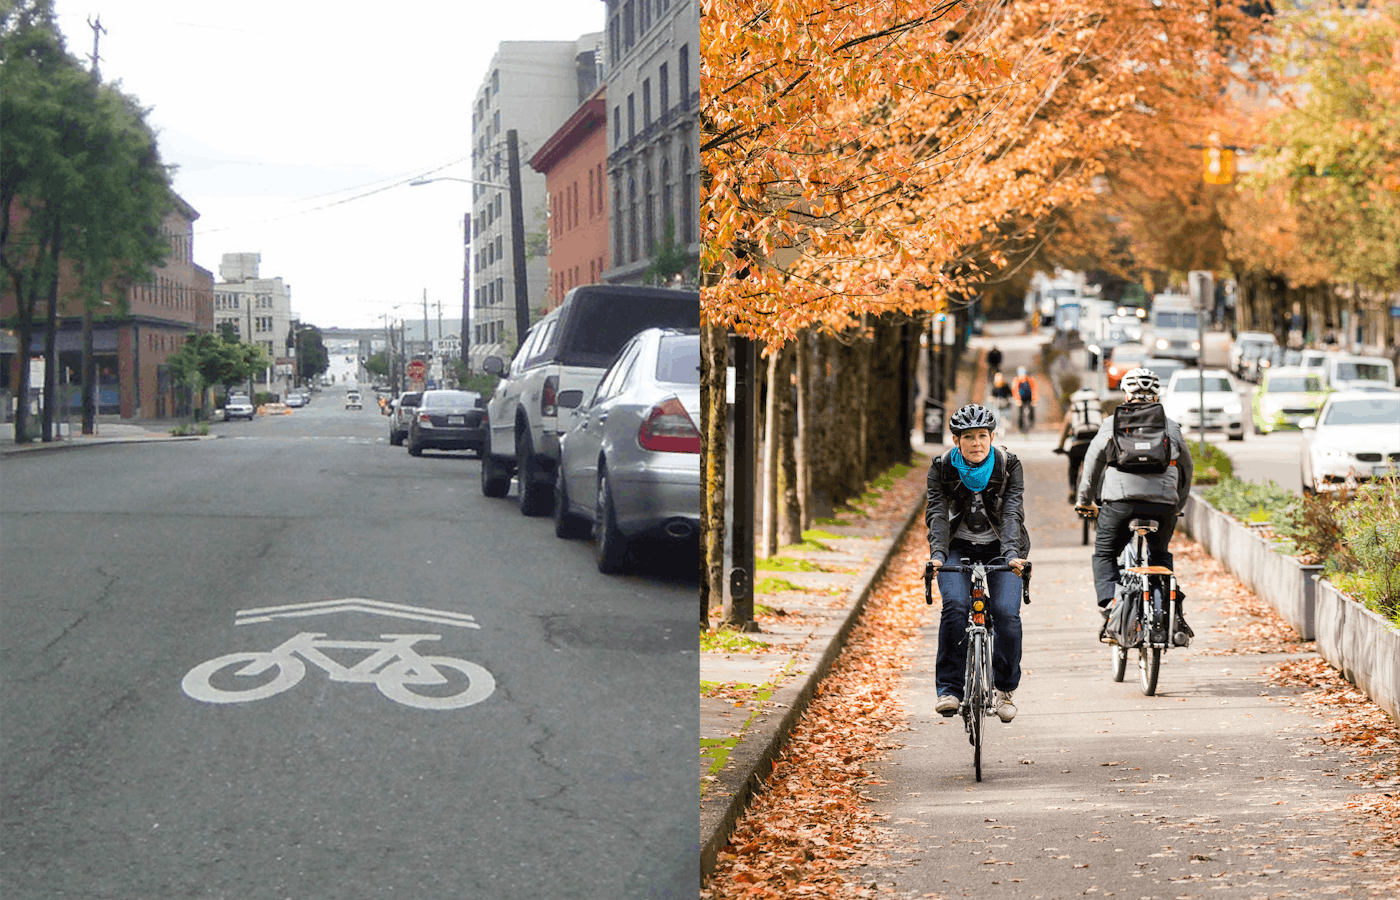 Imagery for the We Were Wrong About Sharrows story